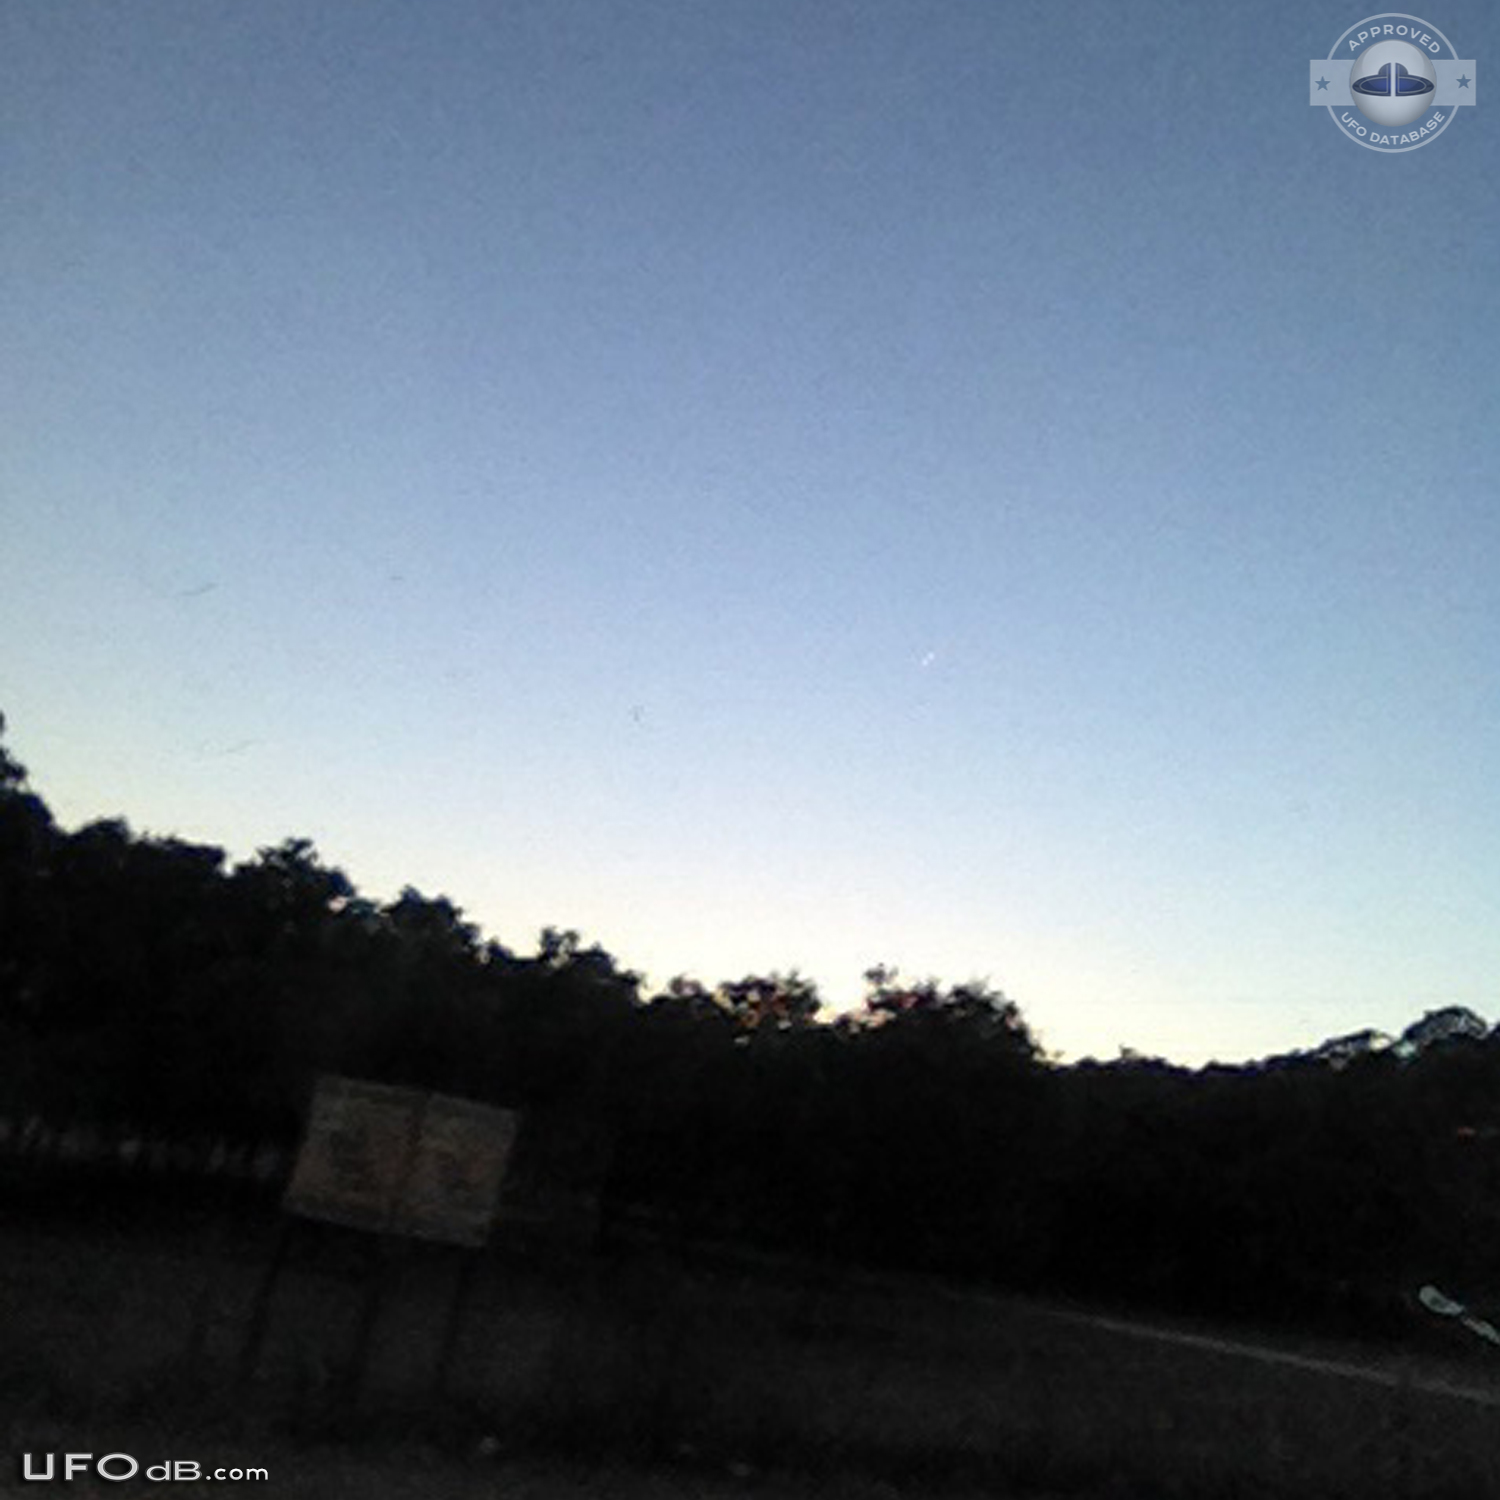 Very Reflective Sphere UFO caught on picture in Boerne, Texas 2013 UFO Picture #557-2